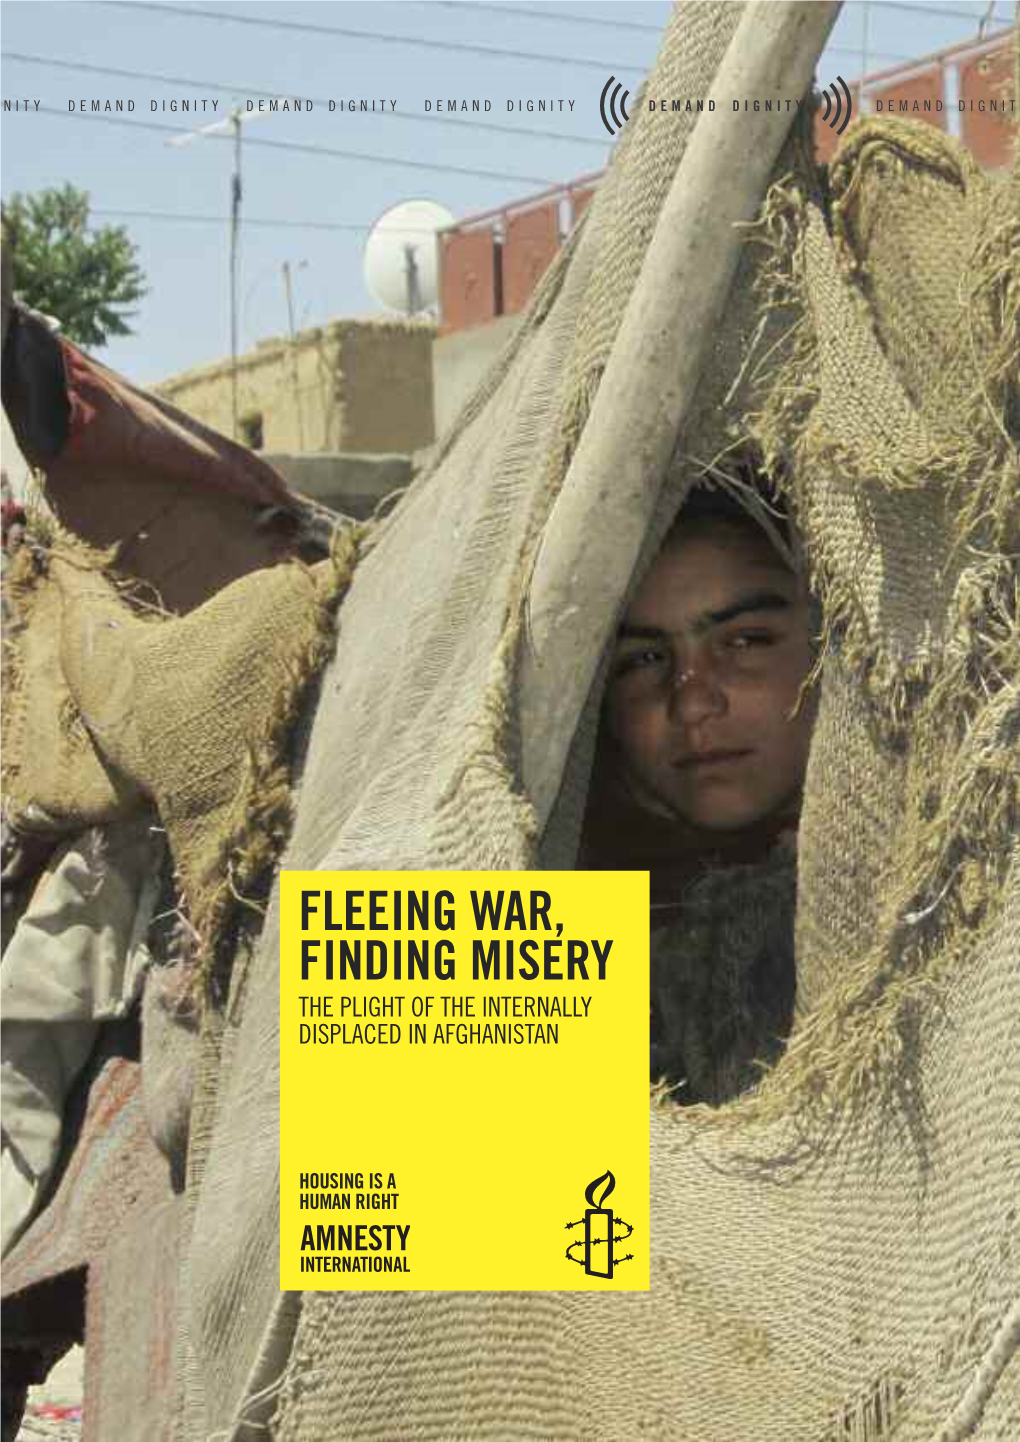 Fleeing War, Finding Misery: the Plight of the Internally Displaced in Afghanistan